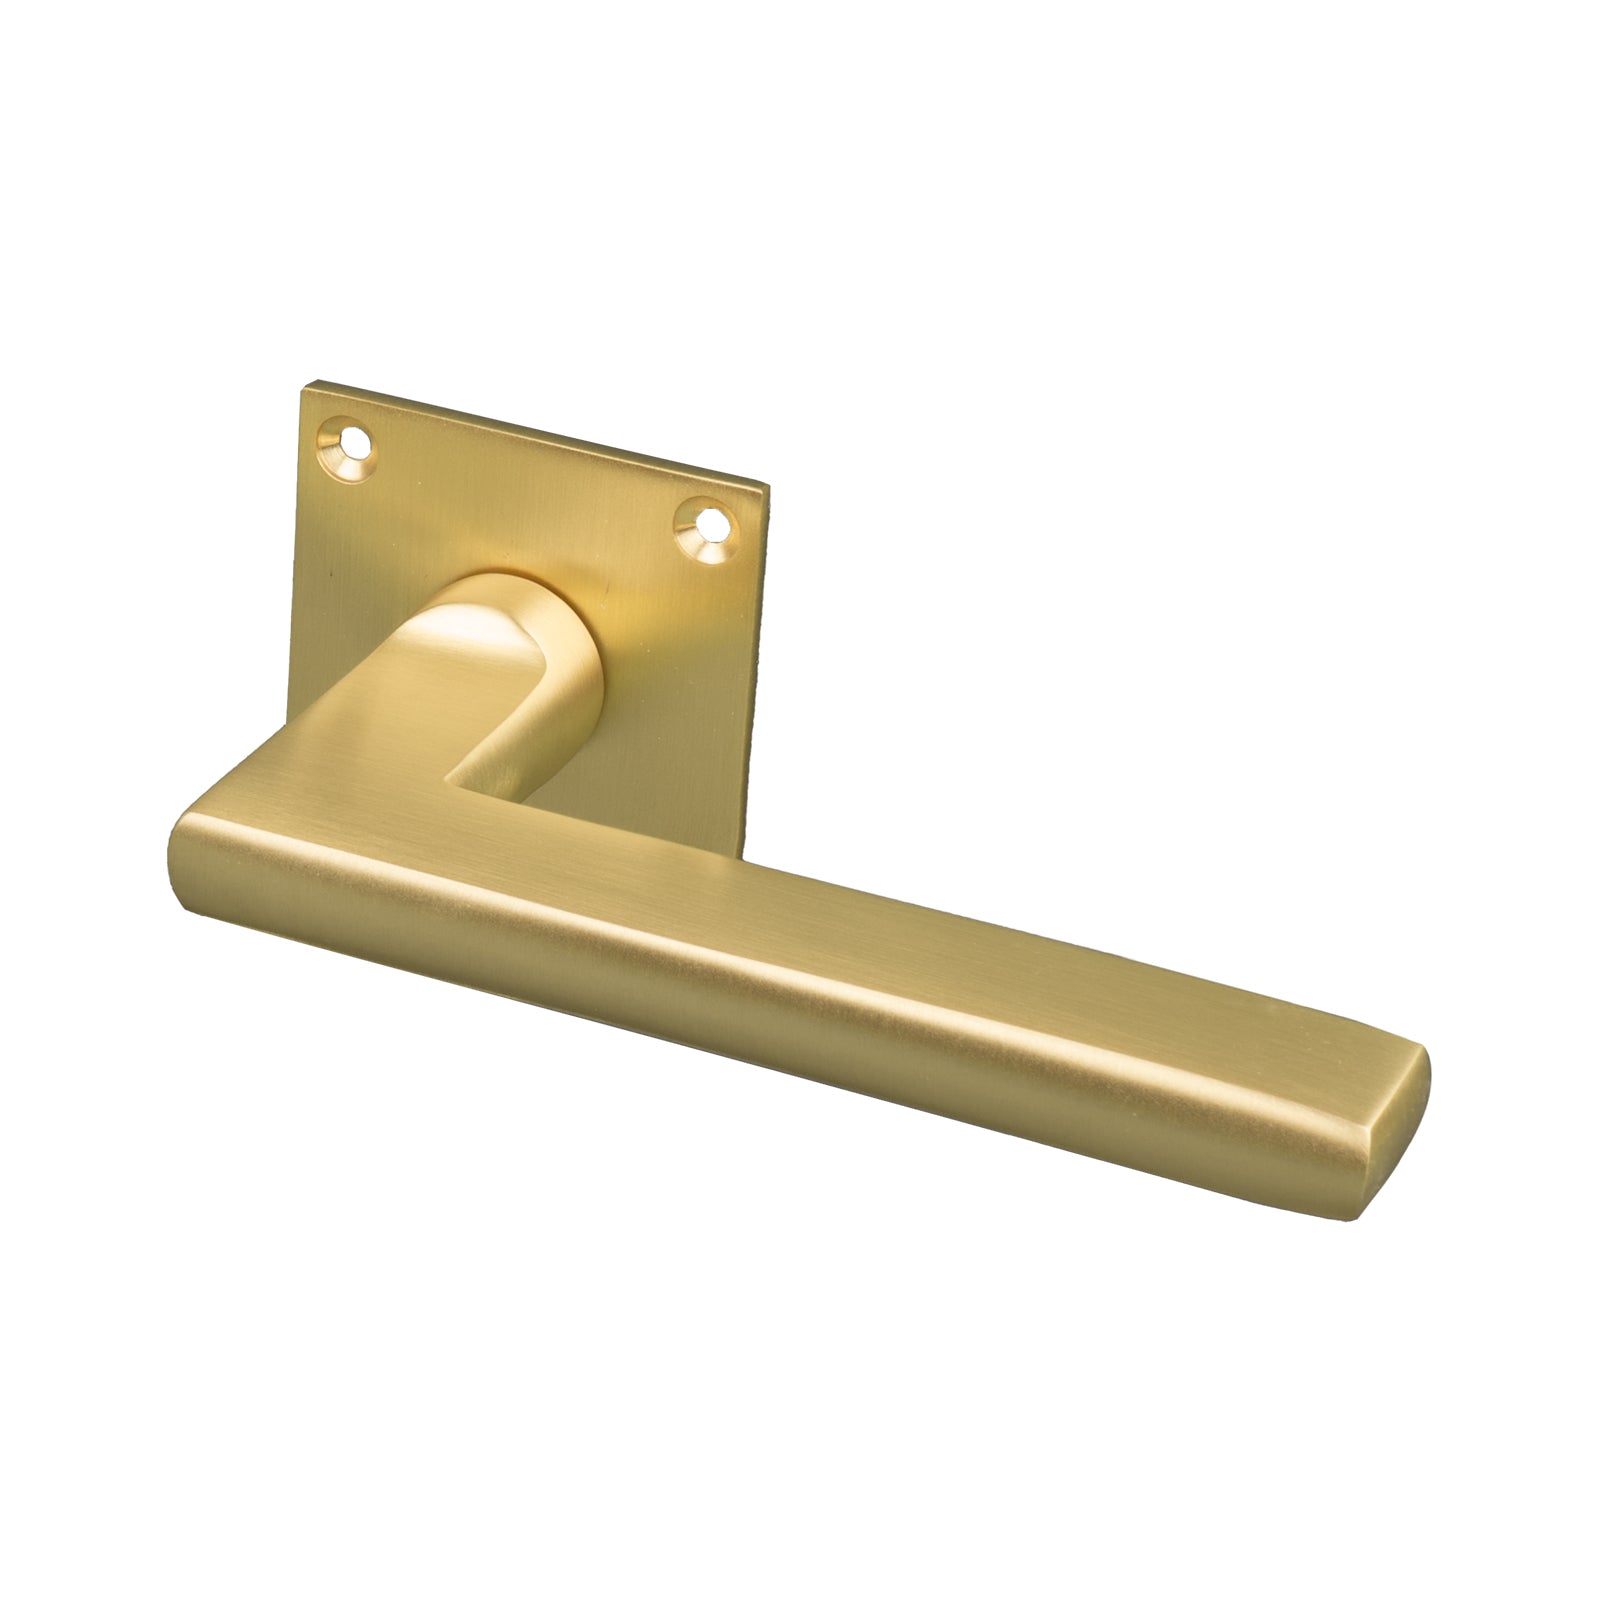 SHOW Trident Square Rose Door Handles - Low Profile with Satin Brass finish